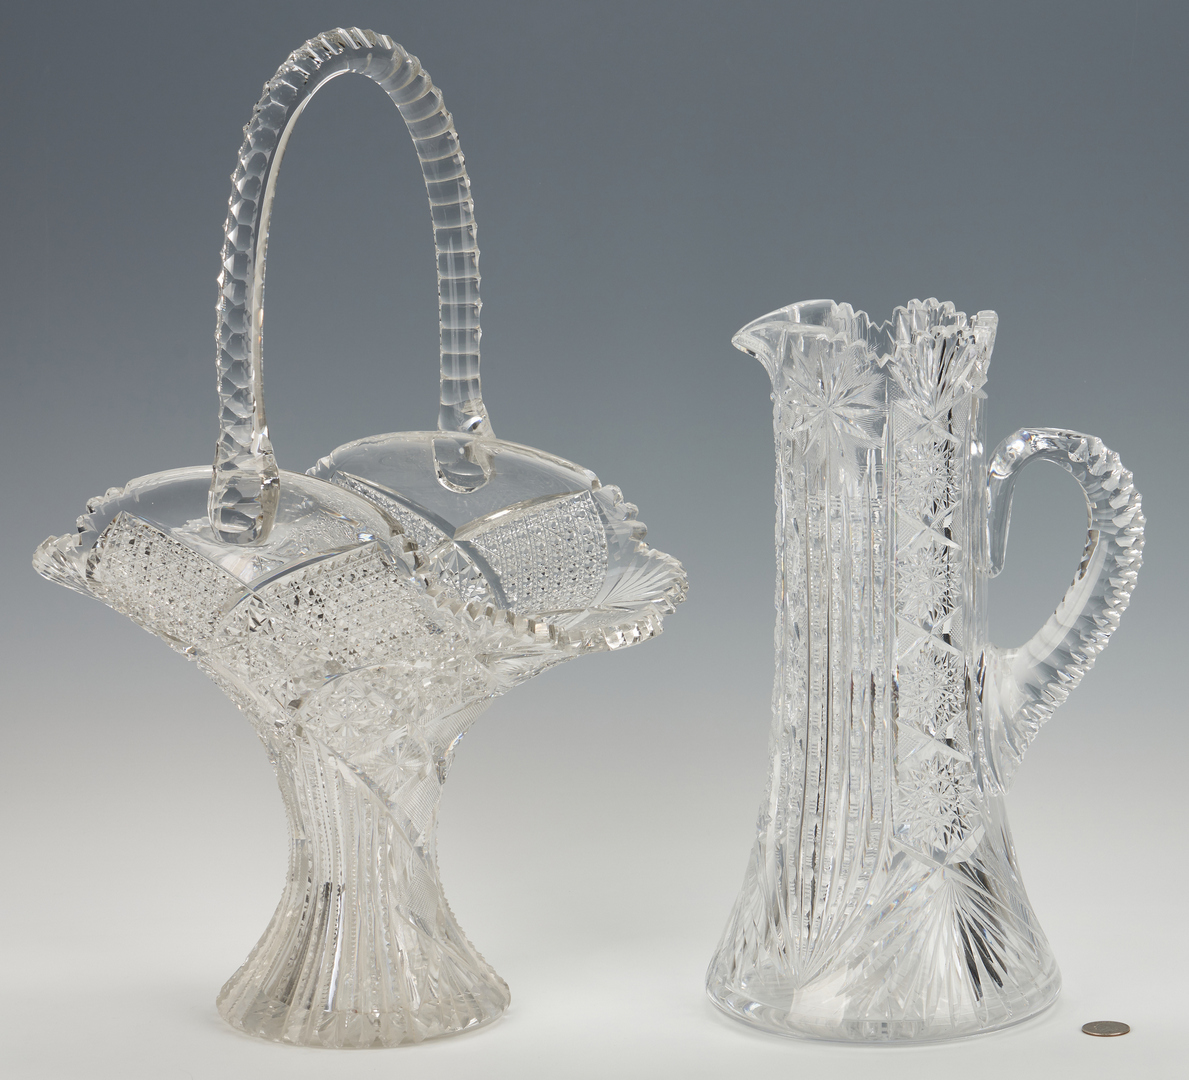 Lot 951: Large Cut Glass Flower Basket, 20"H, and Pitcher